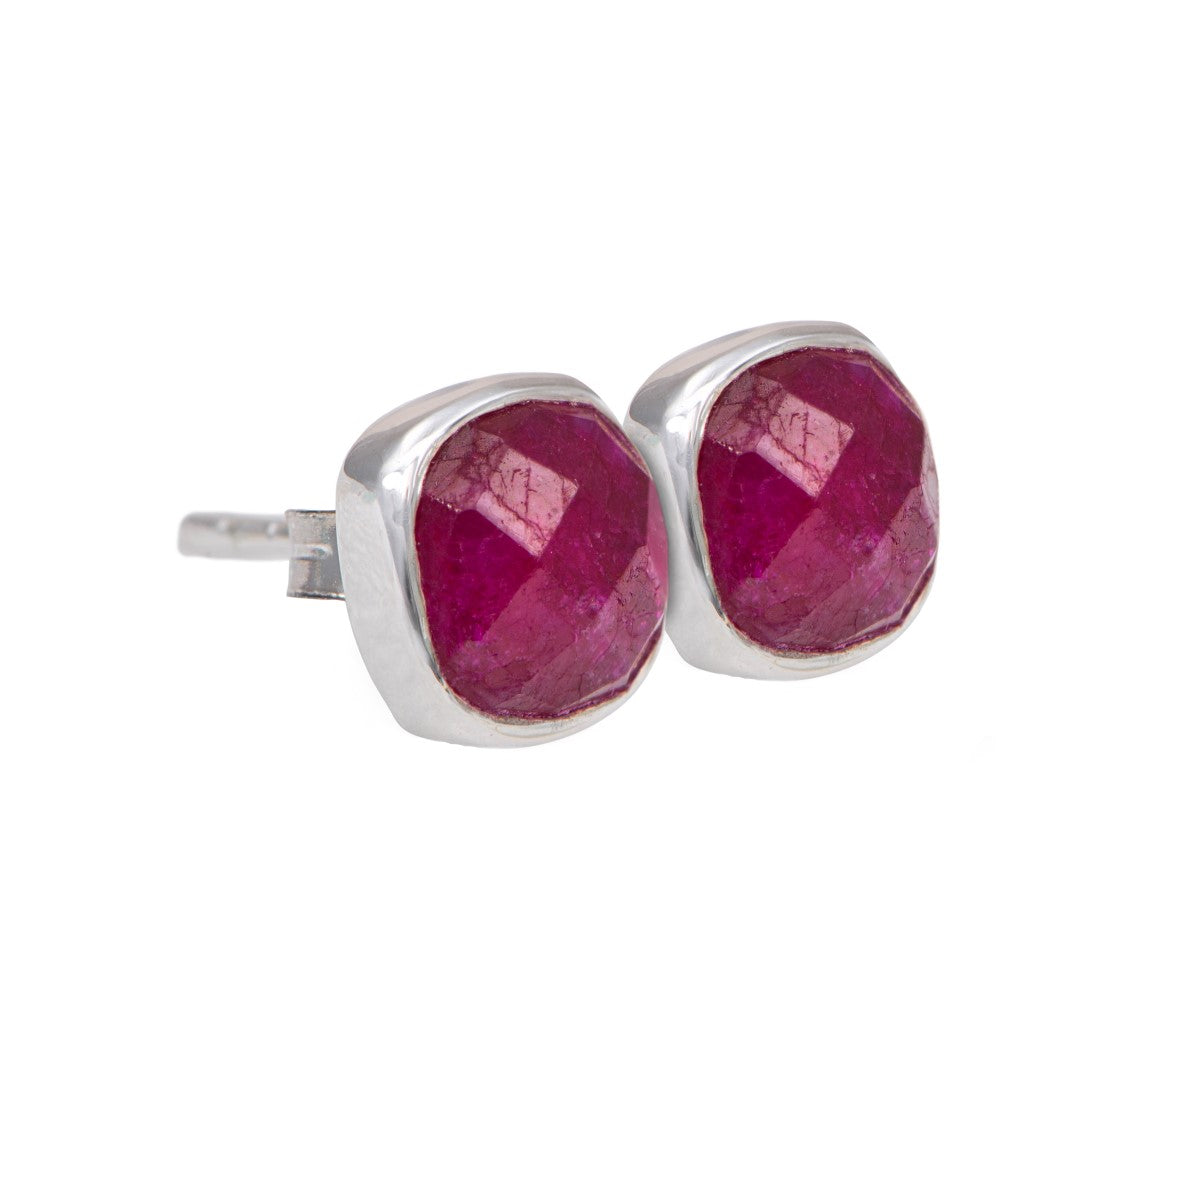 Faceted Square Ruby Quartz Gemstone Stud Earrings in Sterling Silver